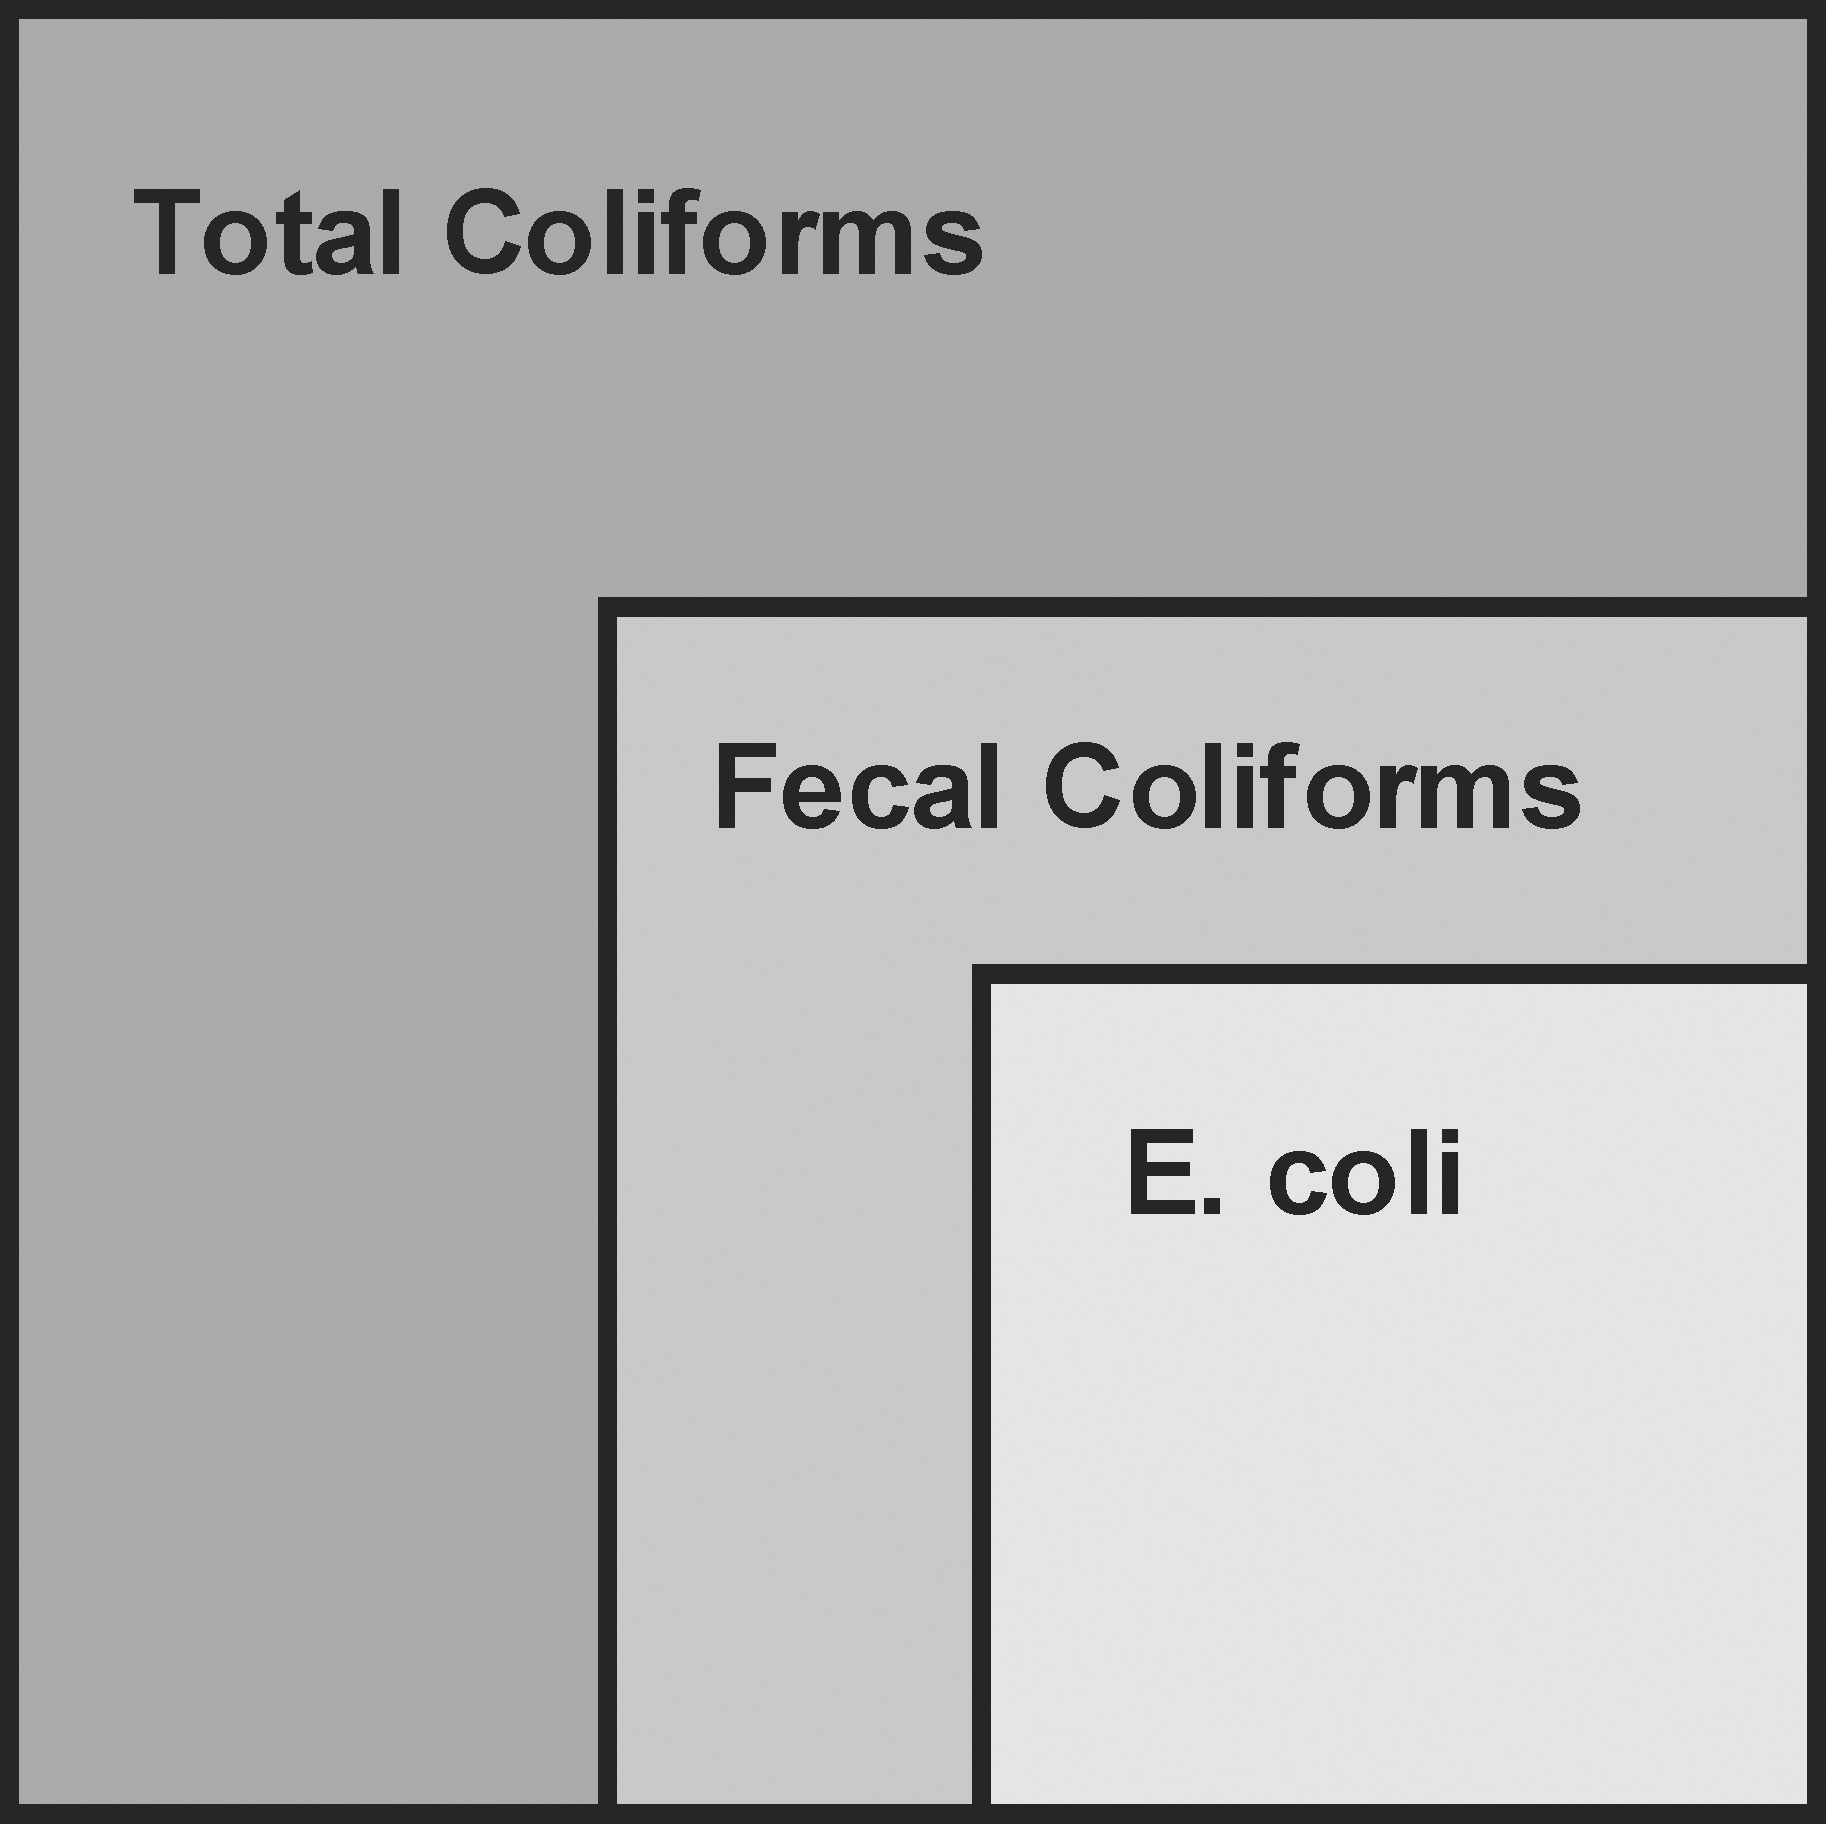 A chart showing that total coliforms is made up of fecal coliforms and E.Coli